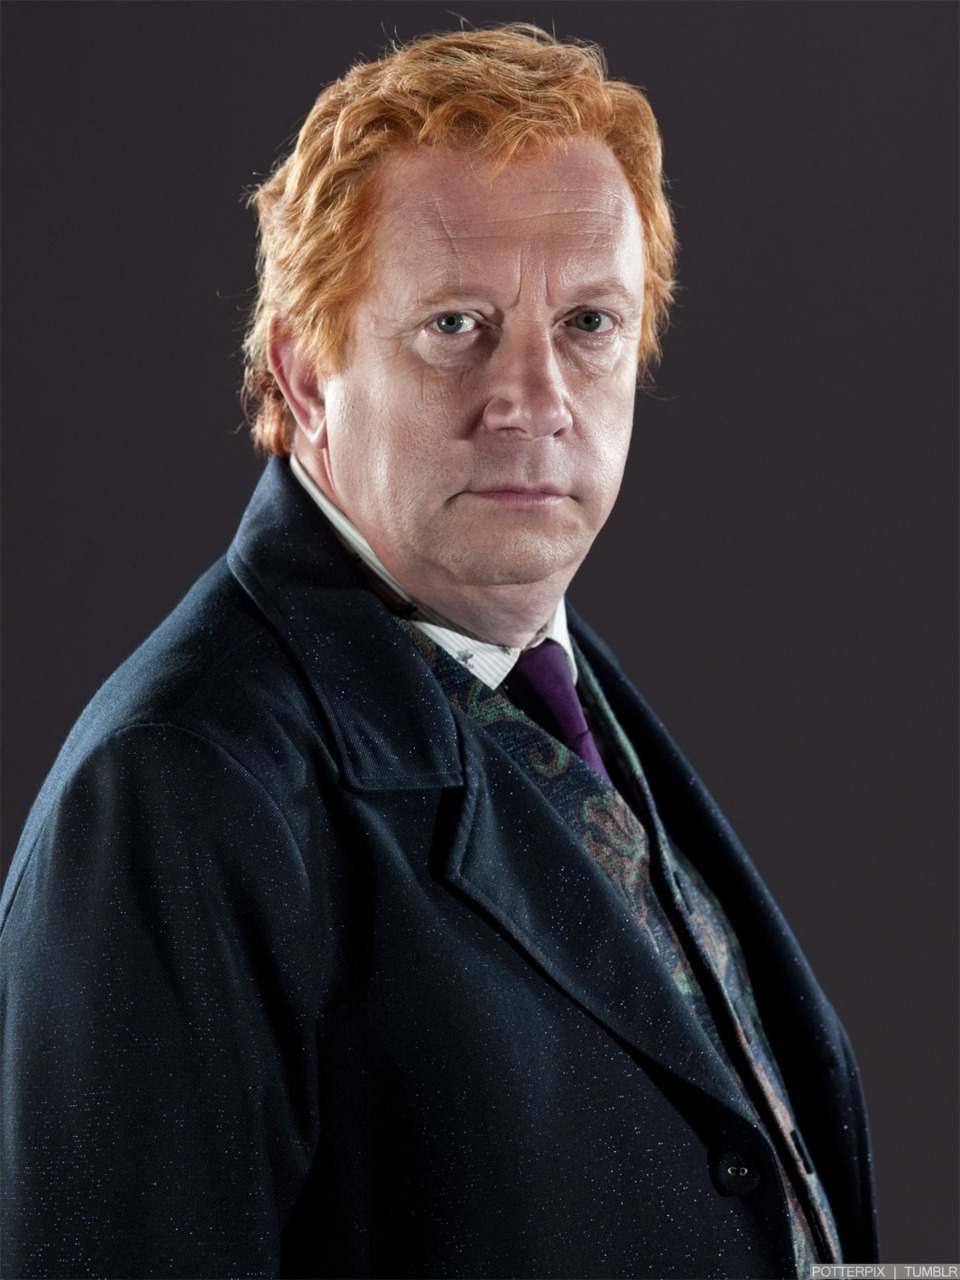 Who portrayed Arthur Weasley in the Harry Potter movies? 2